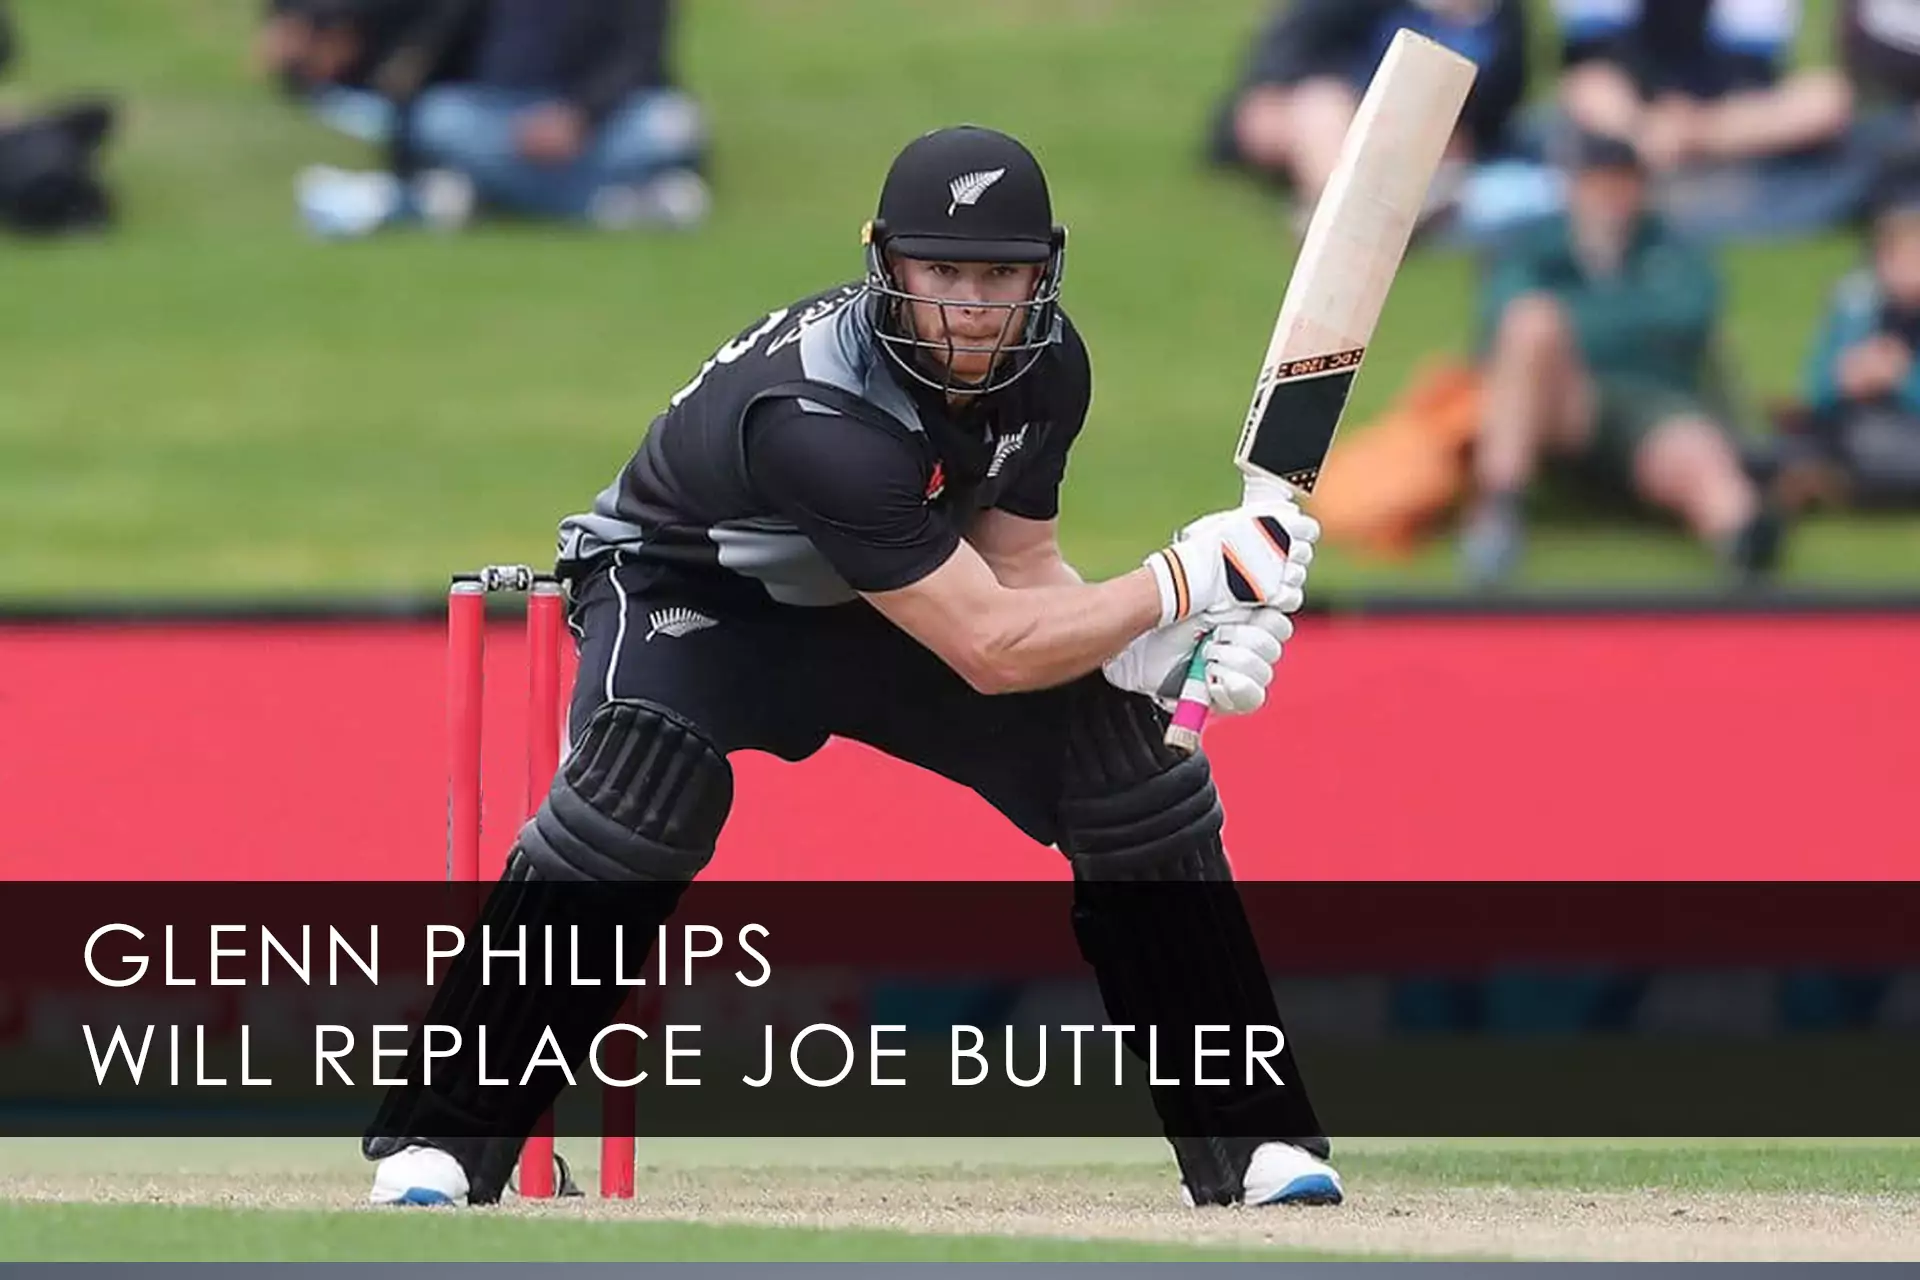 Joe Buttler will be replaced by Glenn Phillips during the IPL 2021.